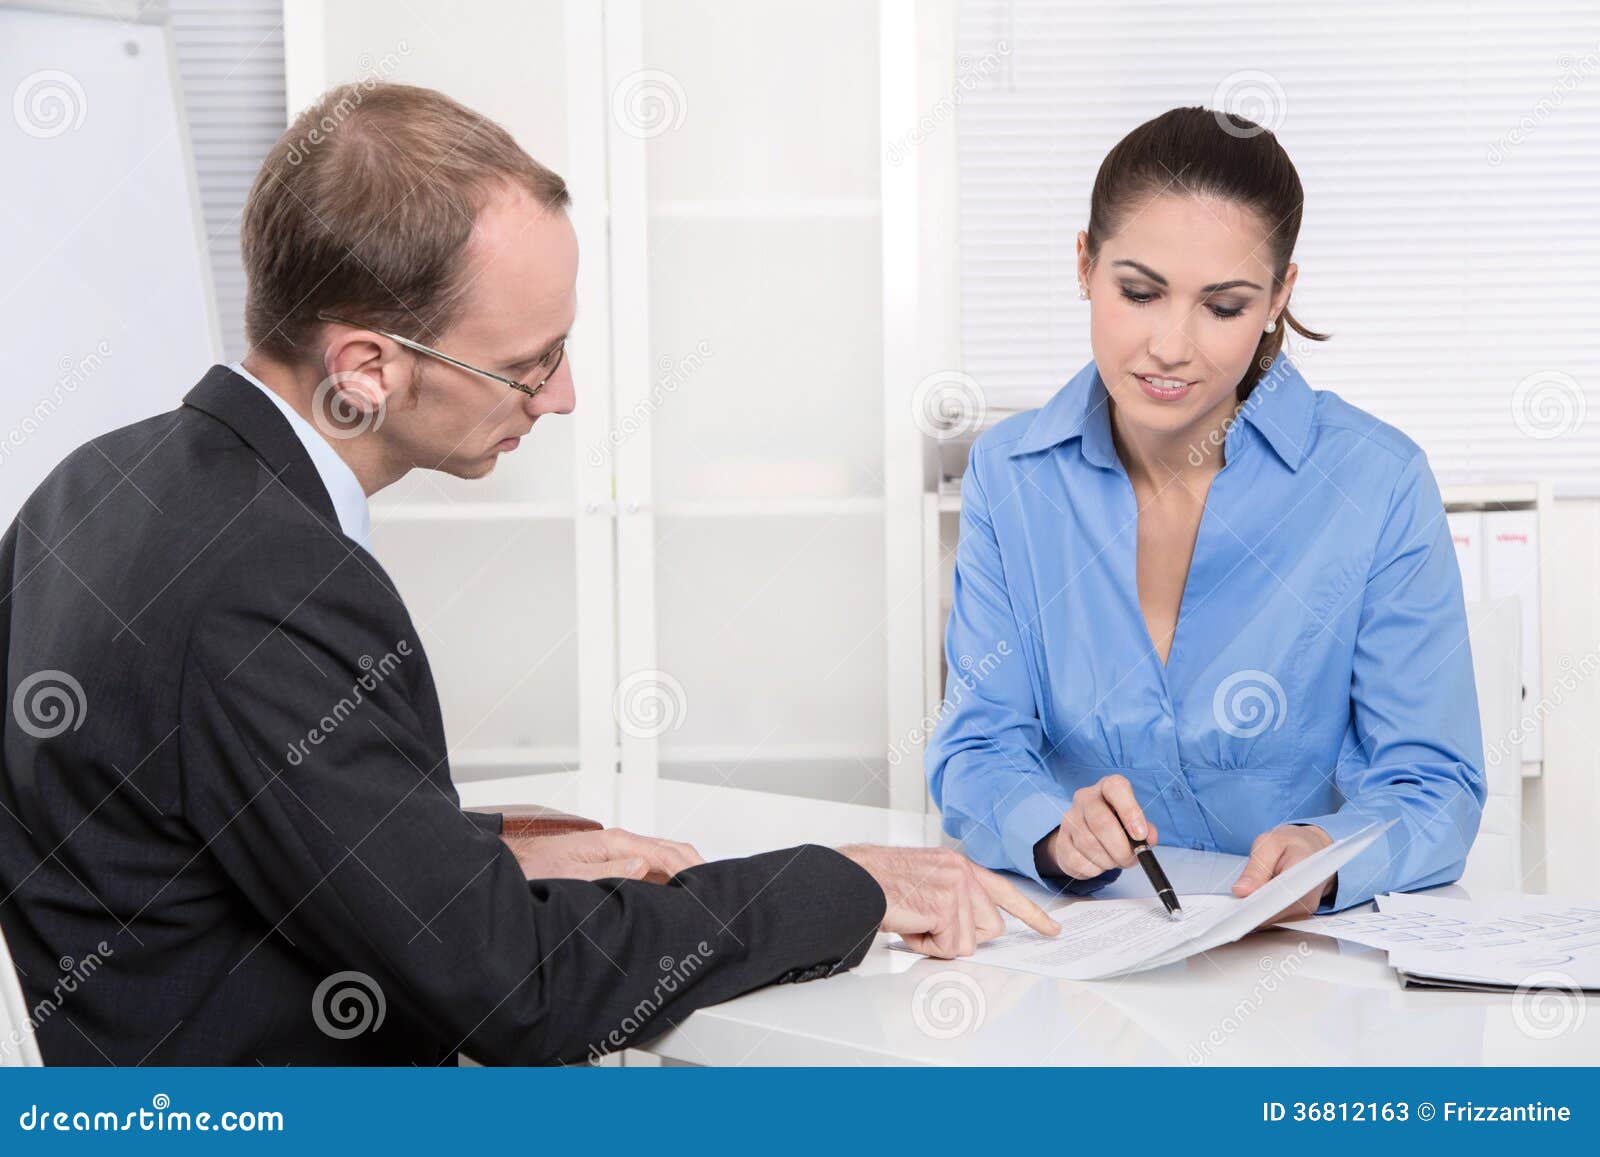 two business people talking together at desk - adviser and customer